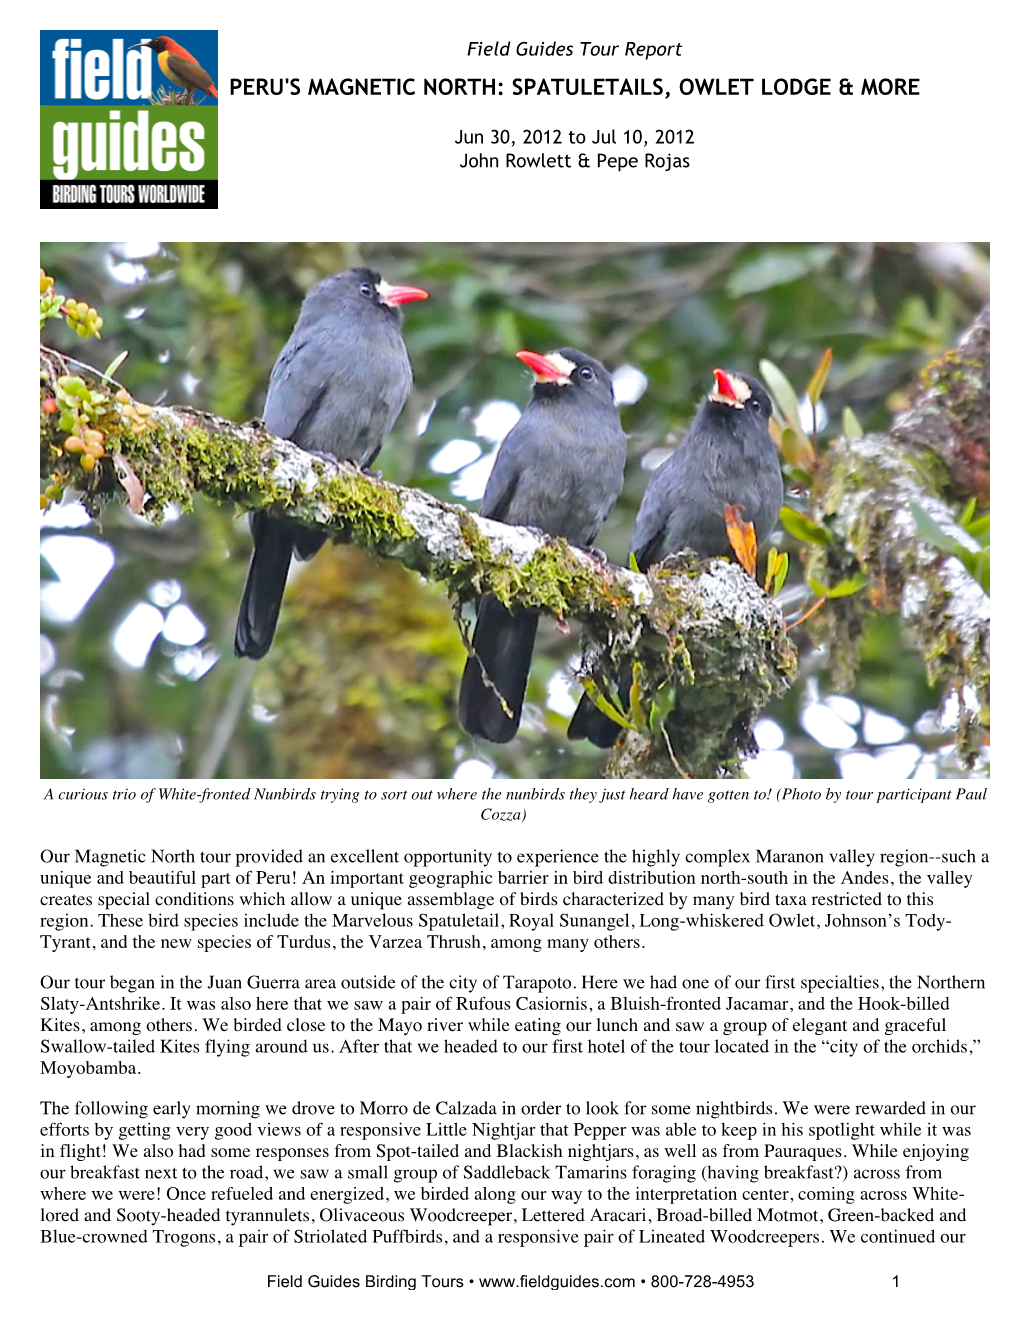 Field Guides Birding Tours Peru's Magnetic North